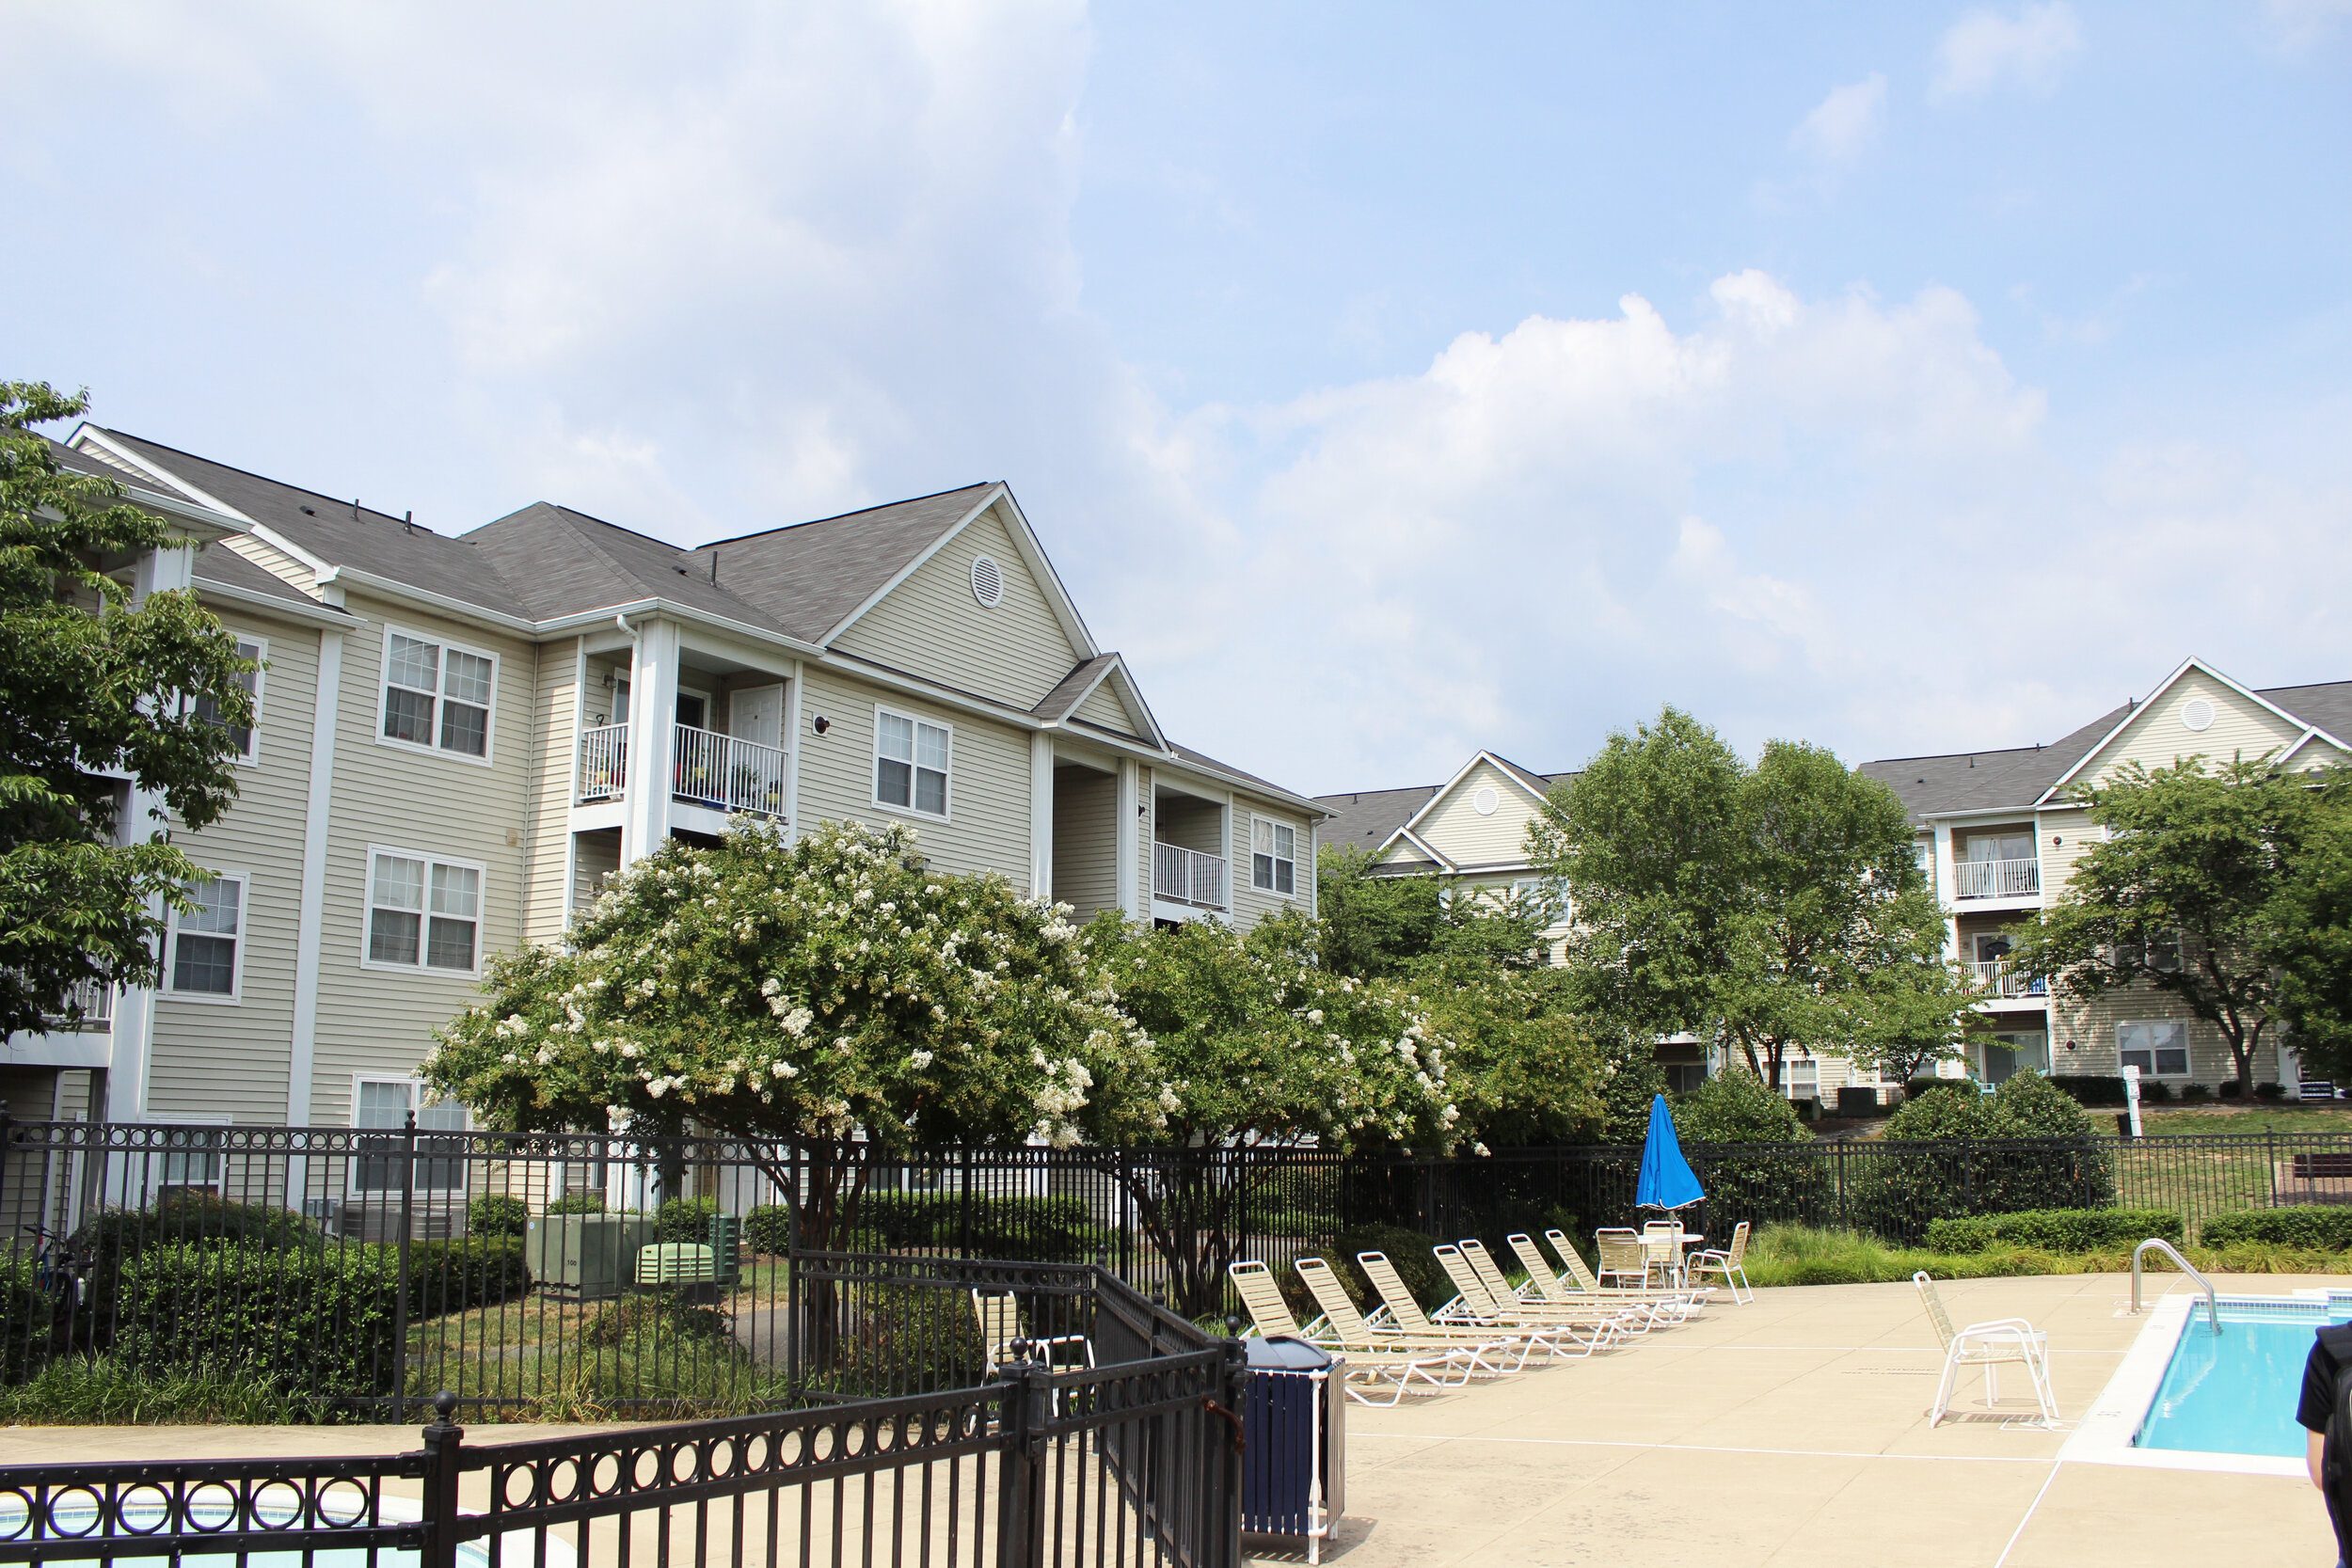  Enjoy all the amenities that Potomac Station Apartments has to offer.  